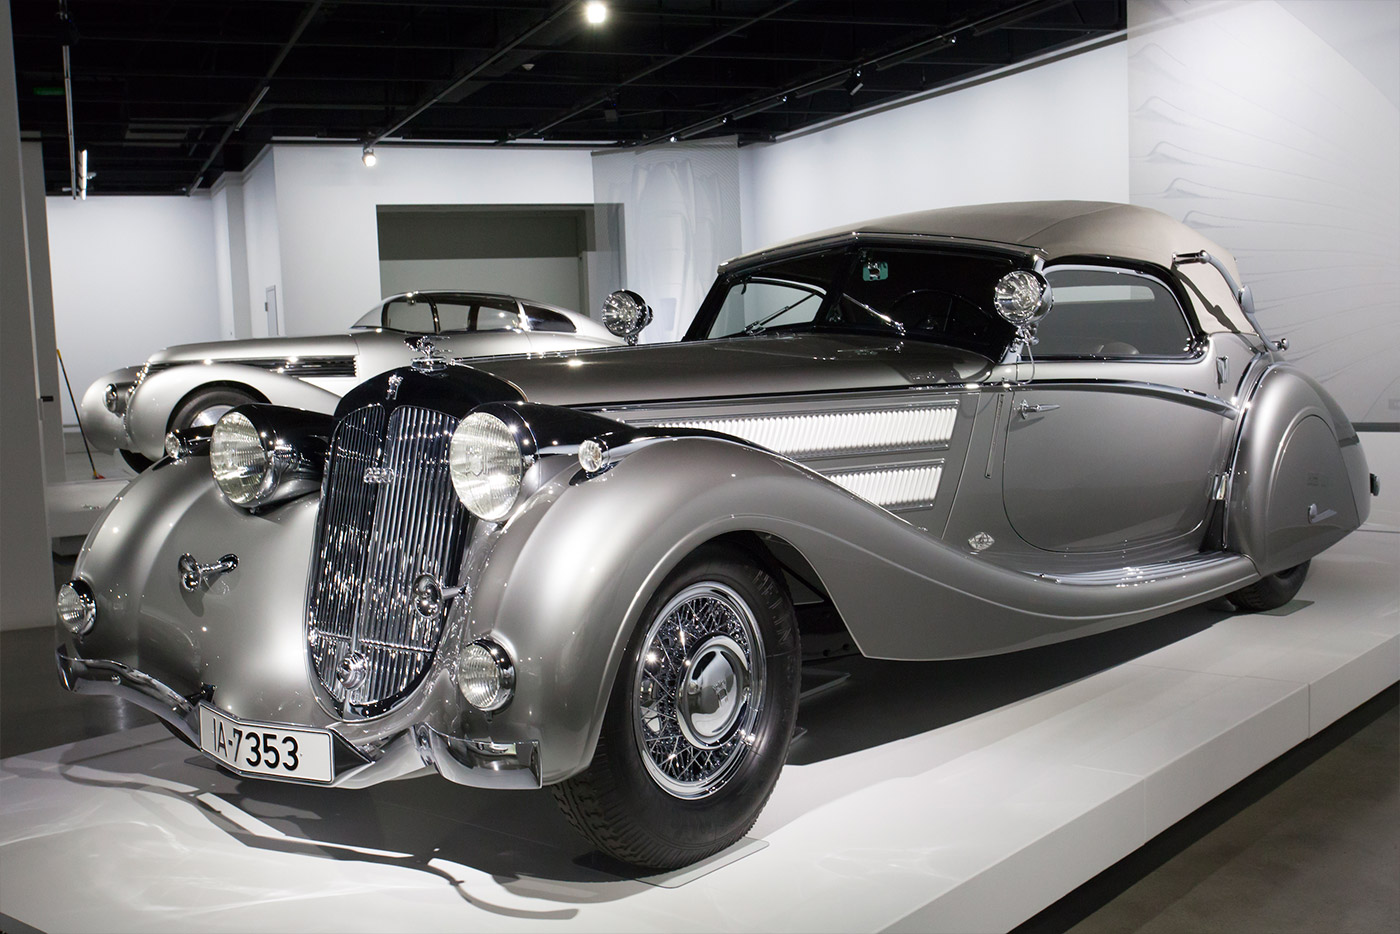 1937 Horch 853 Sport Cabriolet: This model is currently highlighted in the Petersen&#x2019;s &#x201C;Precious Metals&#x201D; exhibition